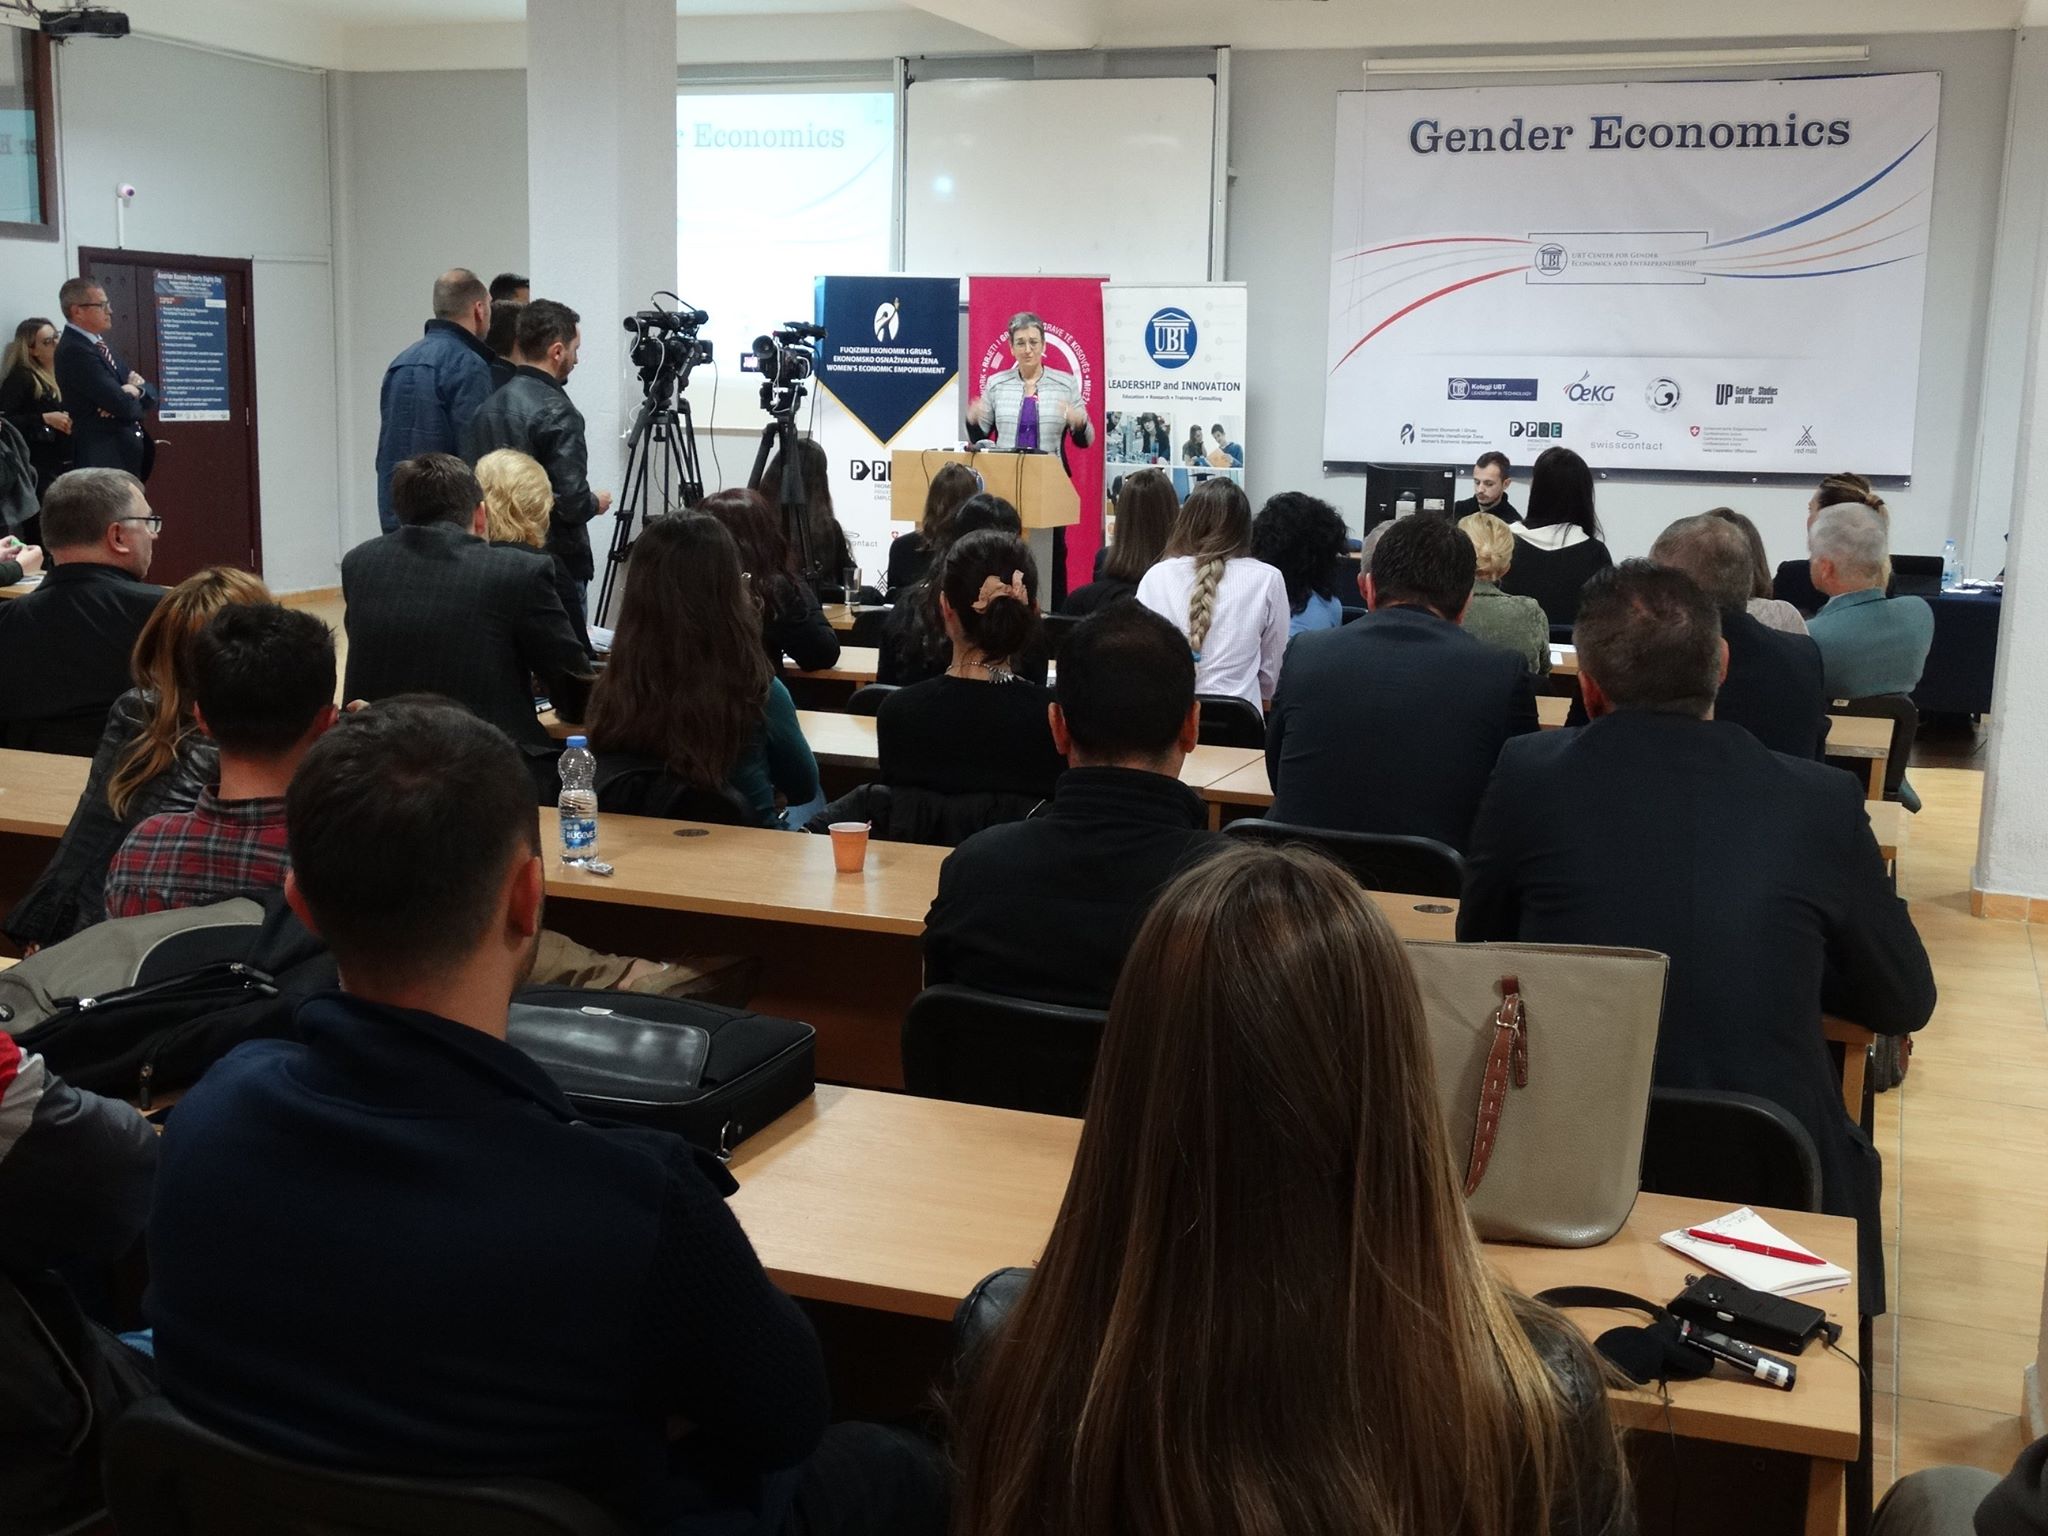 Gender Aspects in Economy Discussed – UBT Center for Economy and Gender Equality Established